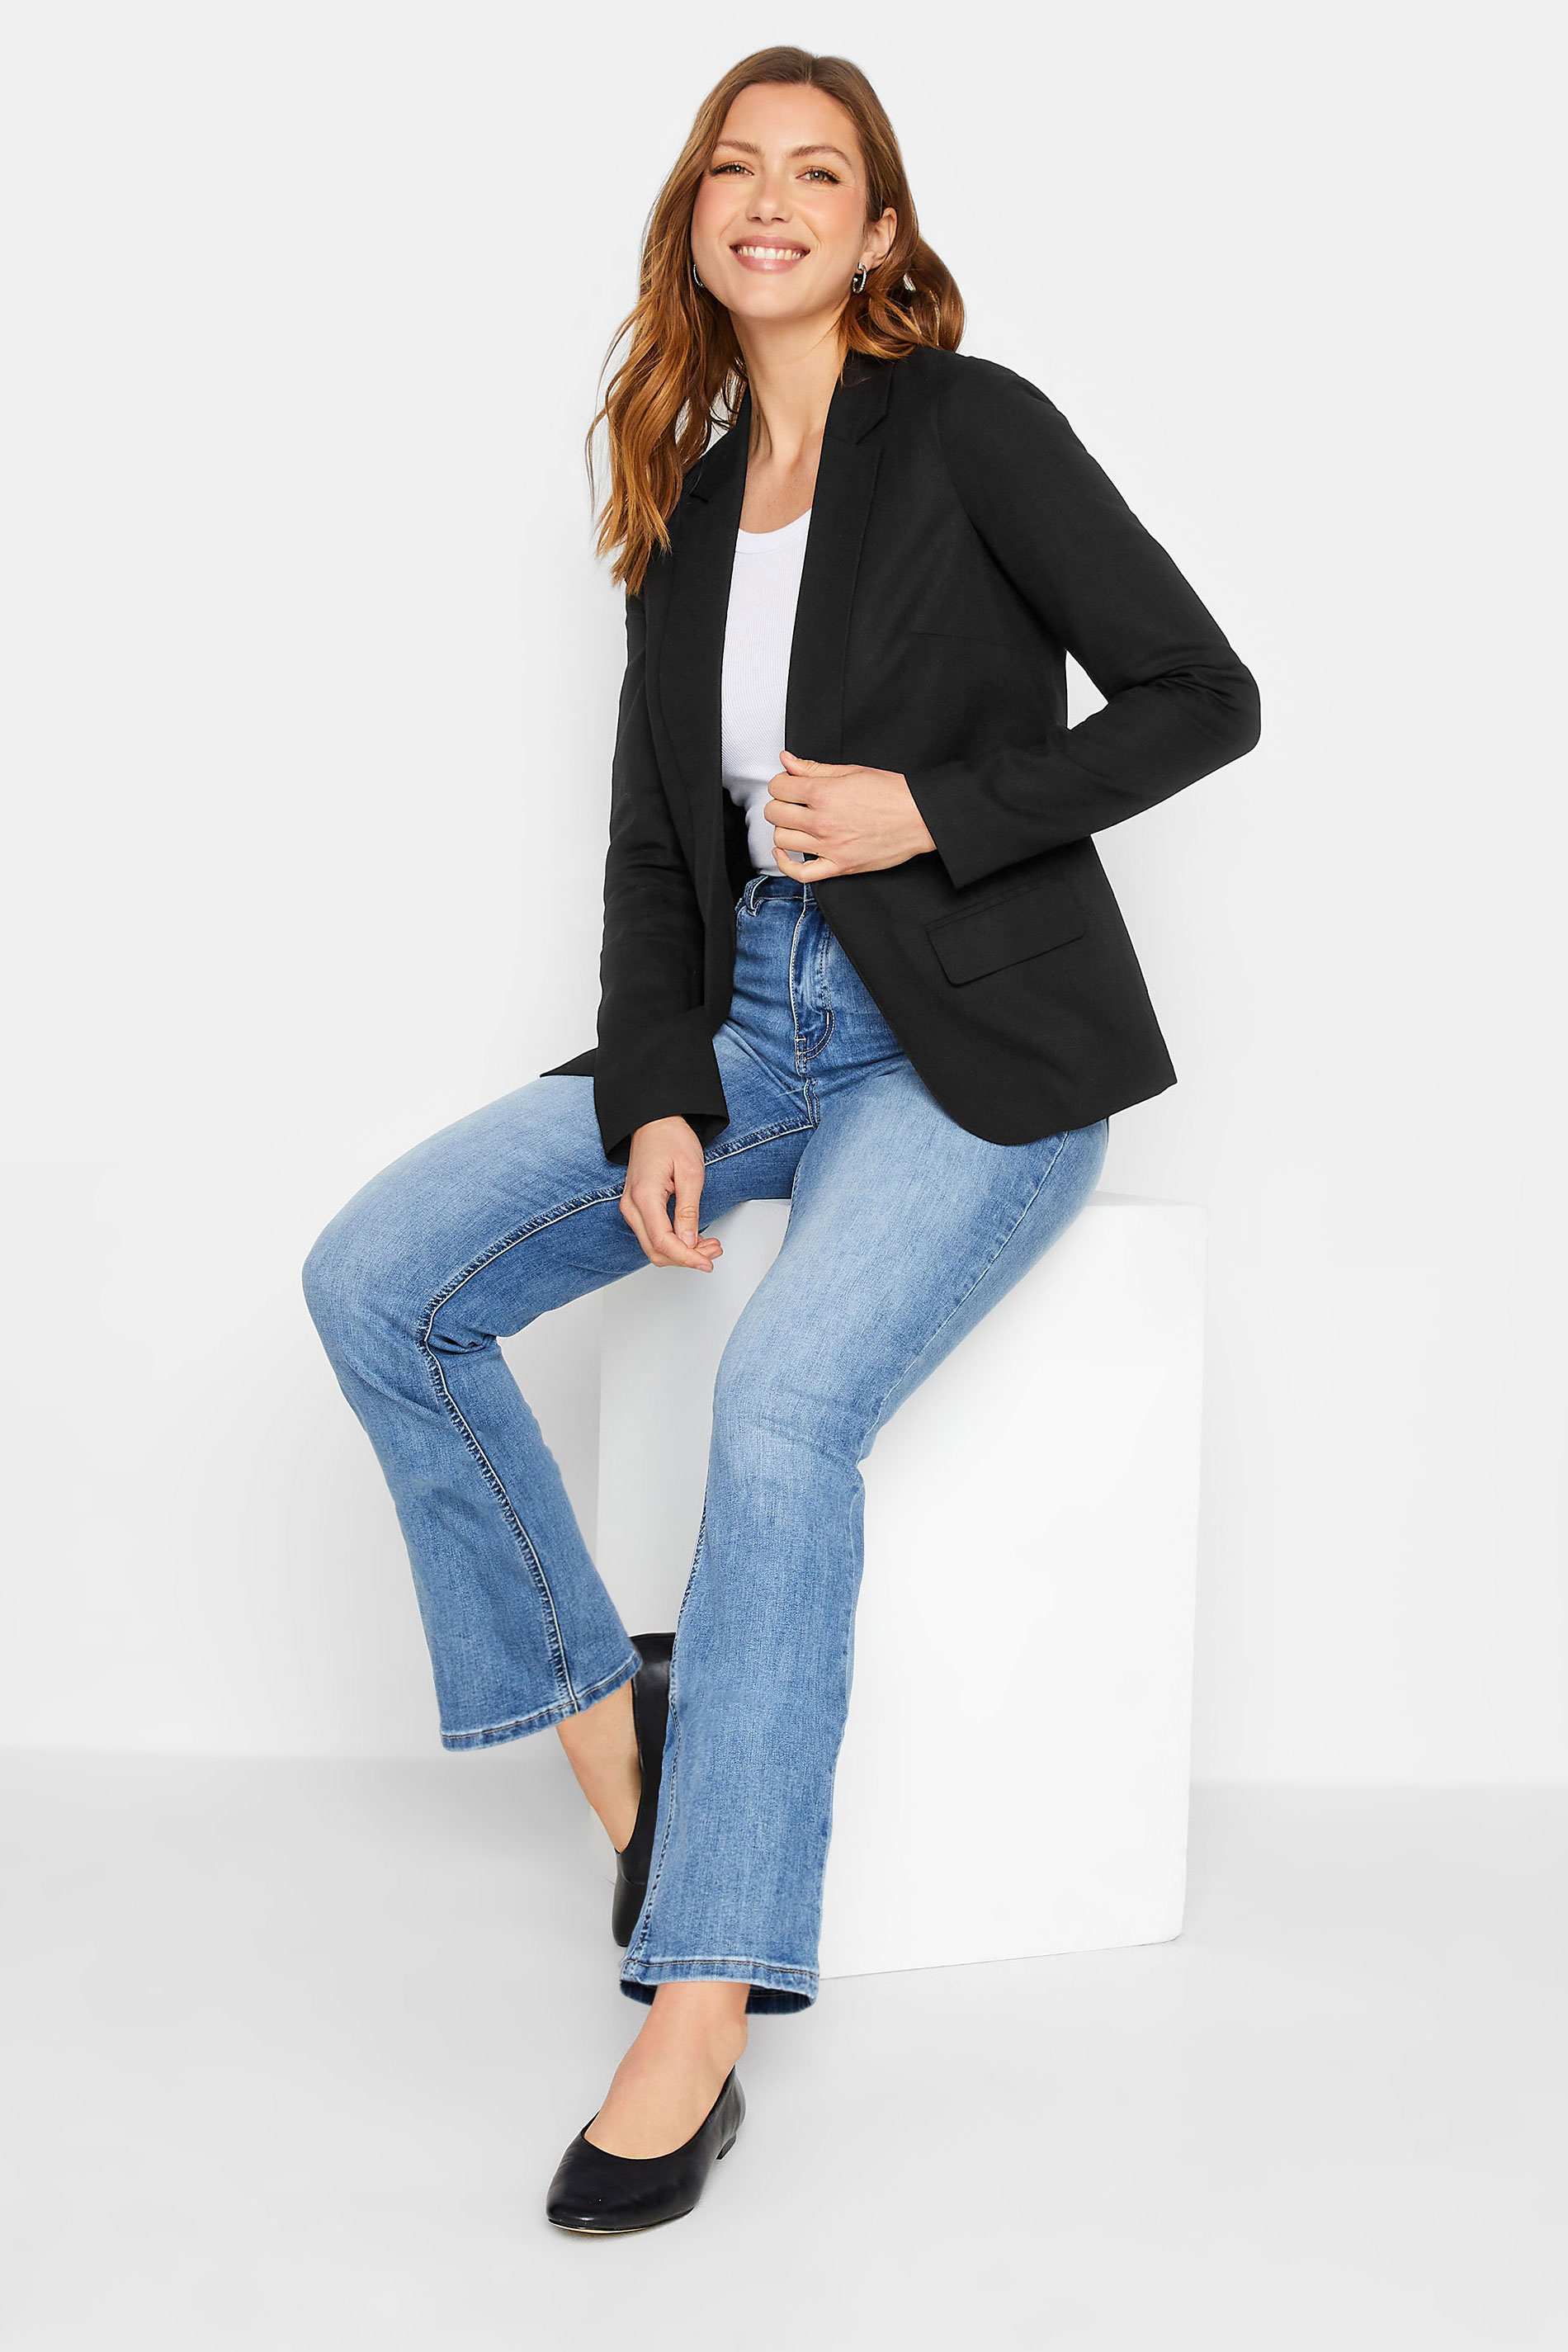 Five Ways To Wear A Black Blazer - A Well Styled Life®